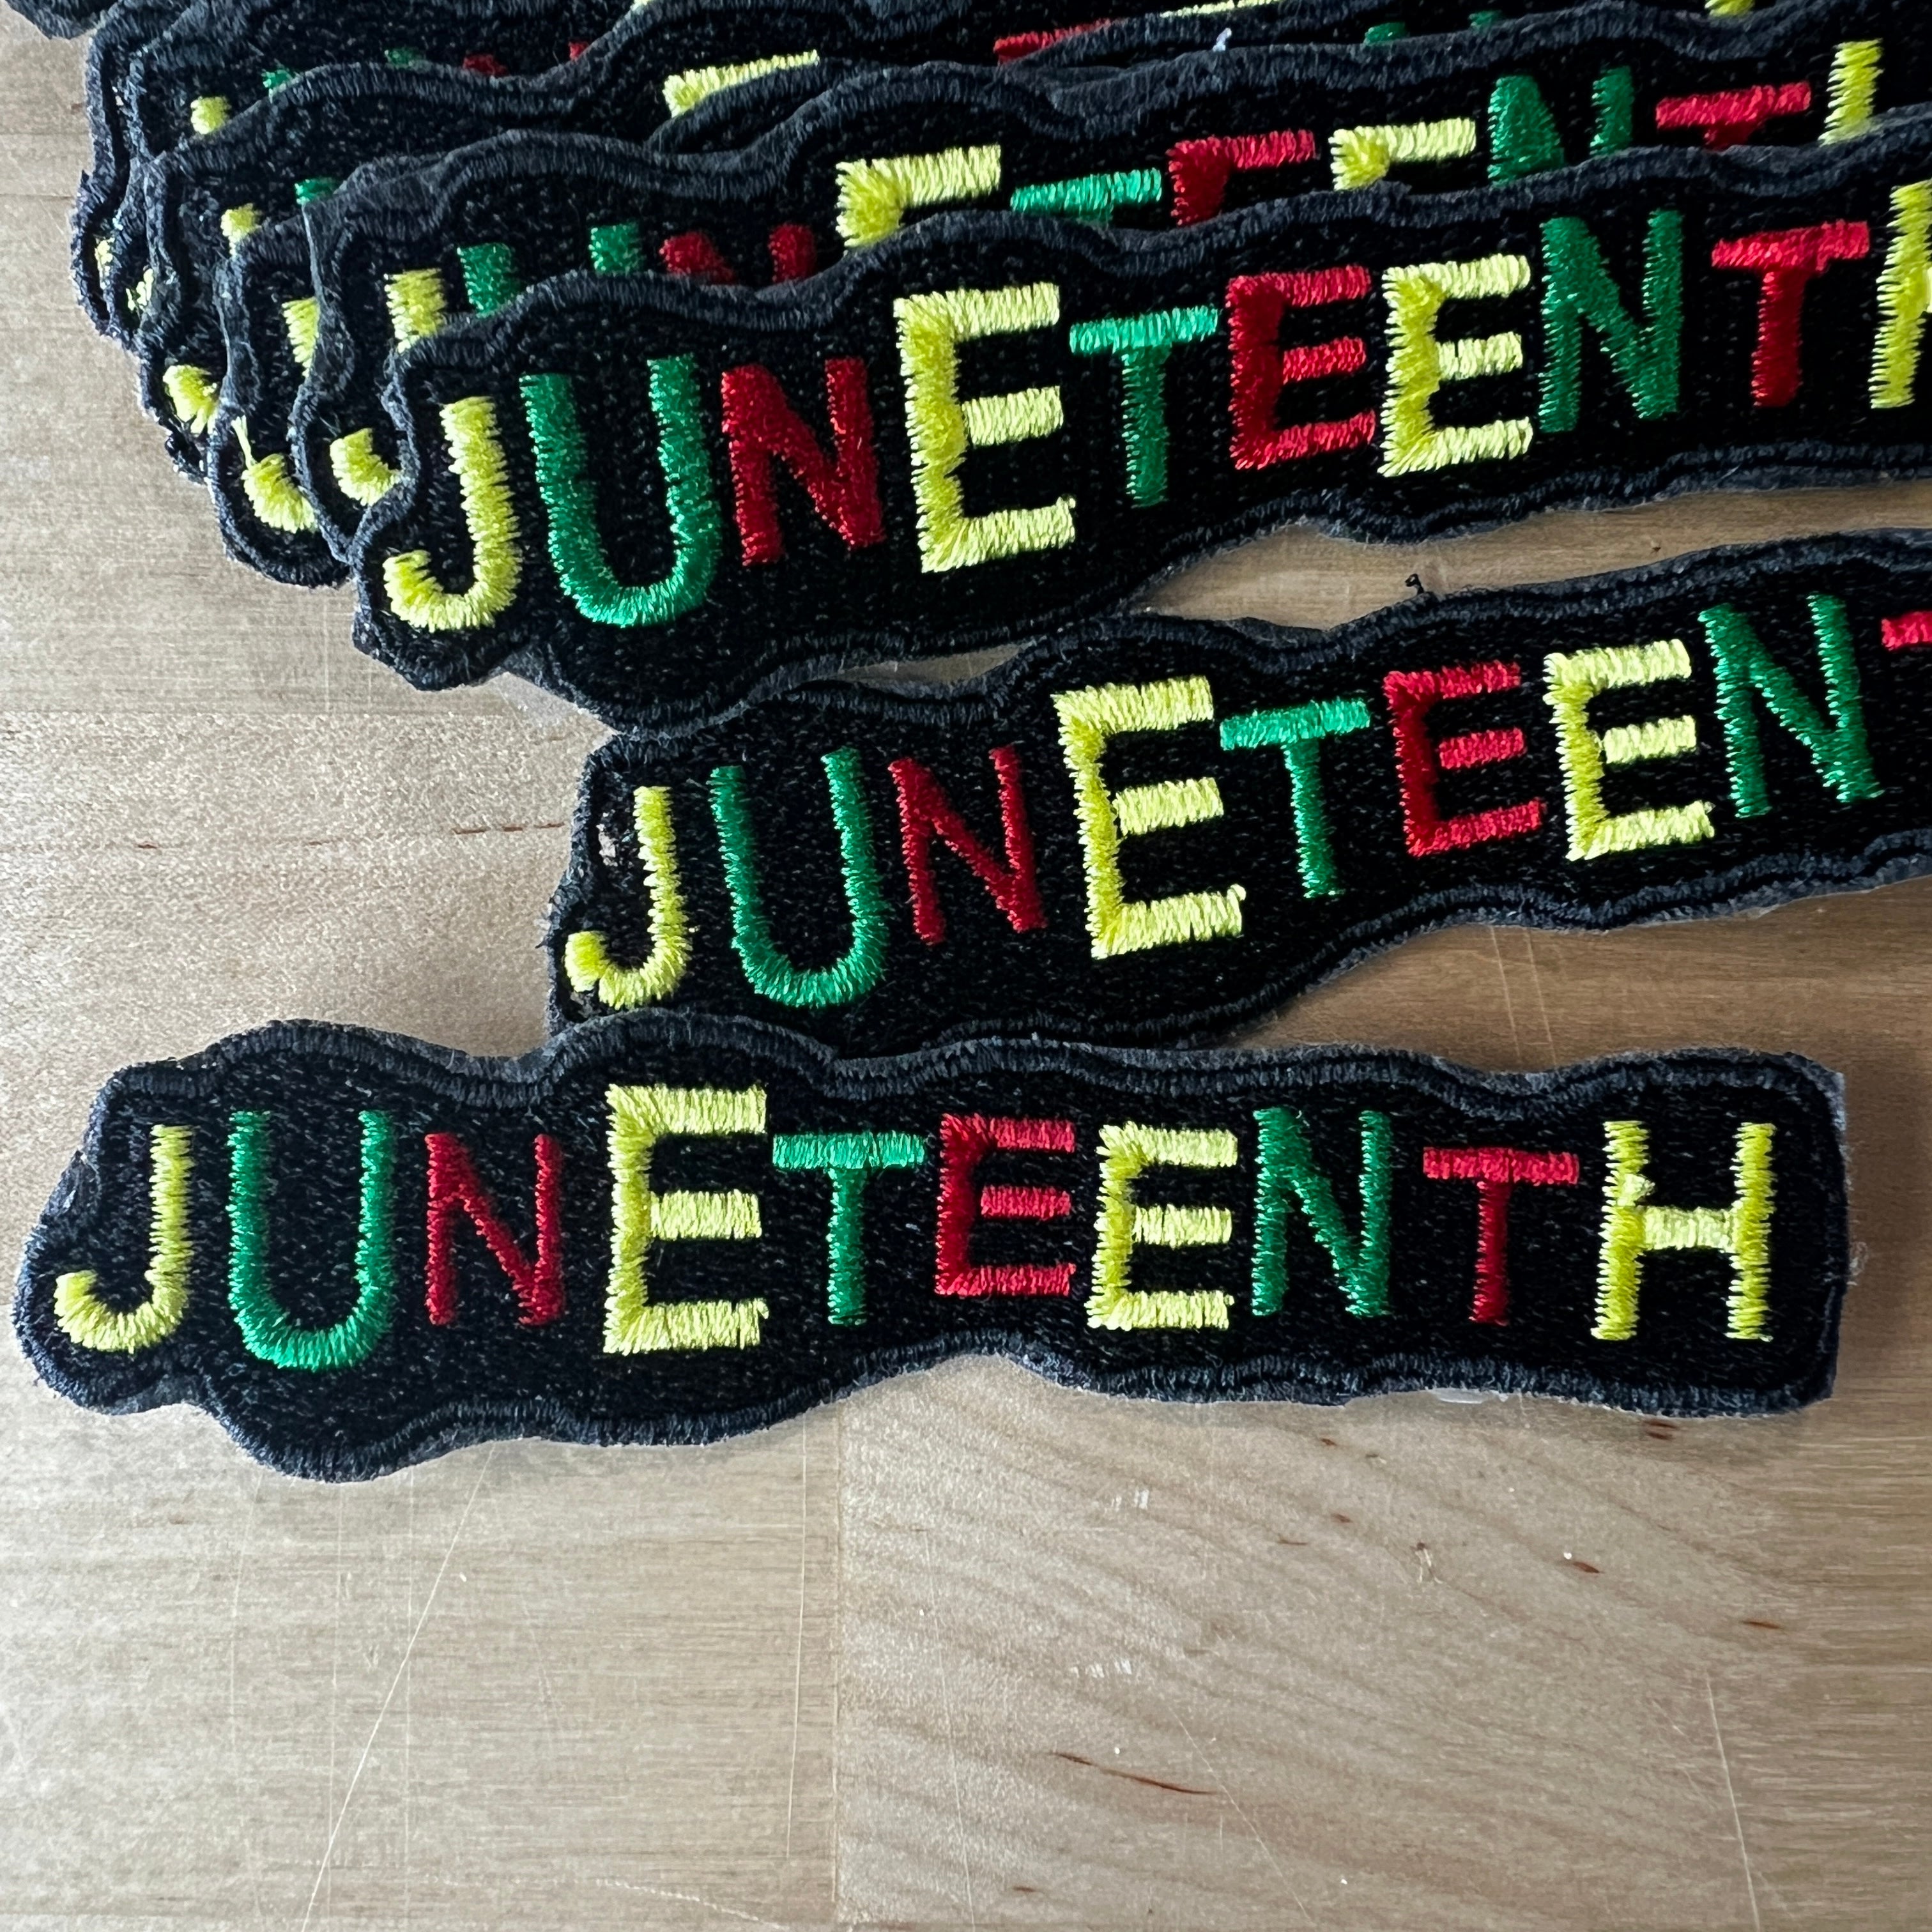 50 Juneteenth press on Embroidery Patches